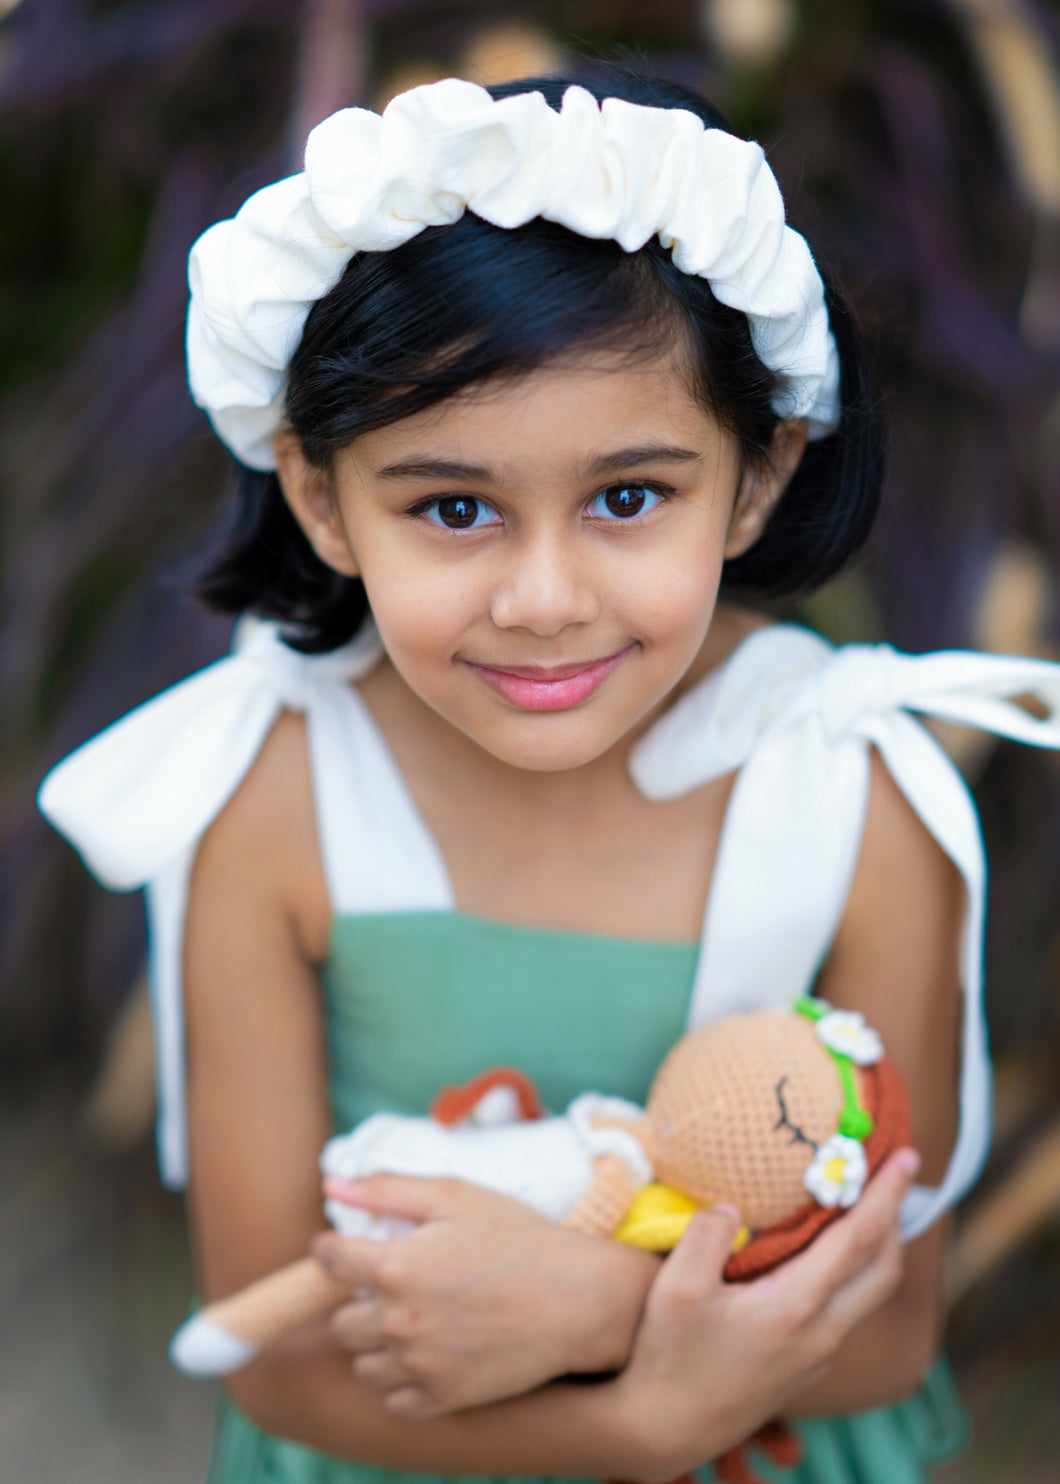 A girl wearing ruffled white headband and also holding a toy.